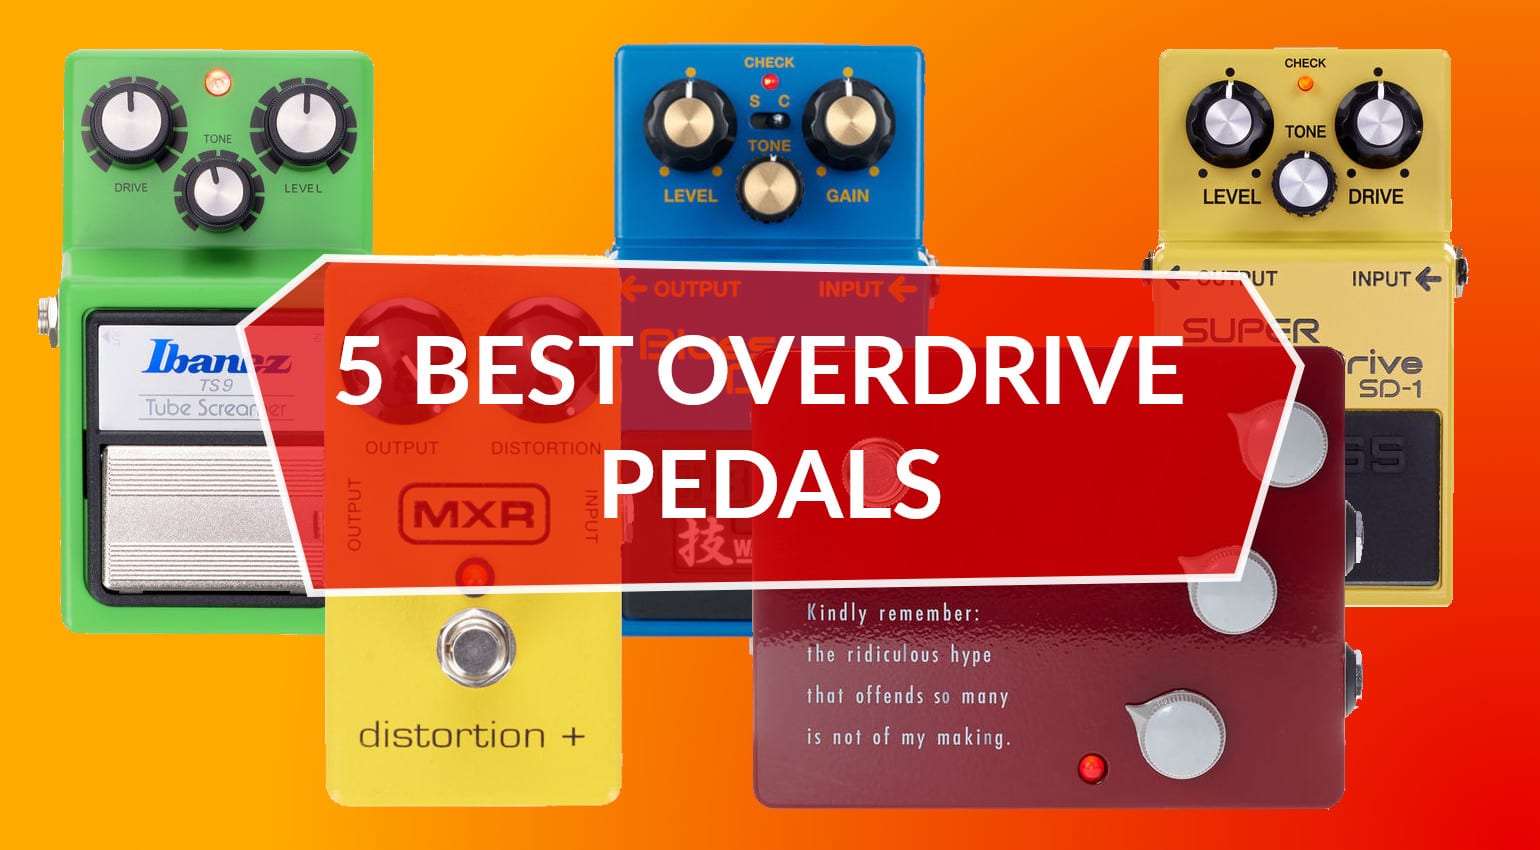 Grabar Refinería Ortodoxo Best Overdrive Pedals: Top 5 classic stompboxes to heat up your tone -  gearnews.com